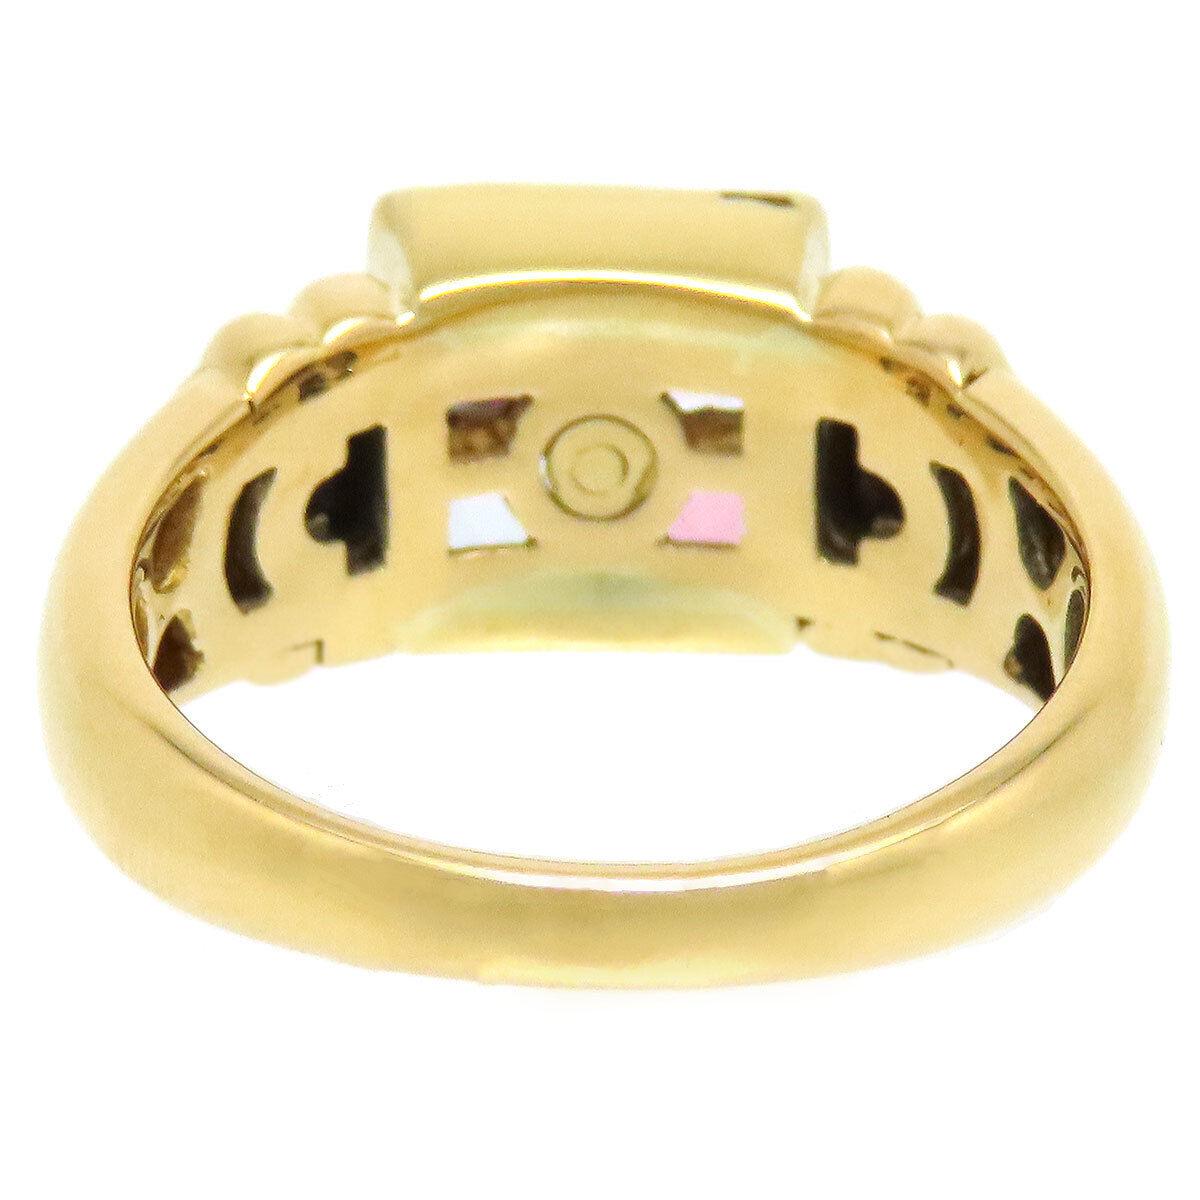 Bvlgari Italy 18k Yellow Gold, Diamond, Tourmaline & Aqua Ring Circa 1980s

Here is your chance to purchase a beautiful and highly collectible designer ring.  
The ring was made in the 1980s and is classic Bvlgari.  The ring size is 6.5 and the